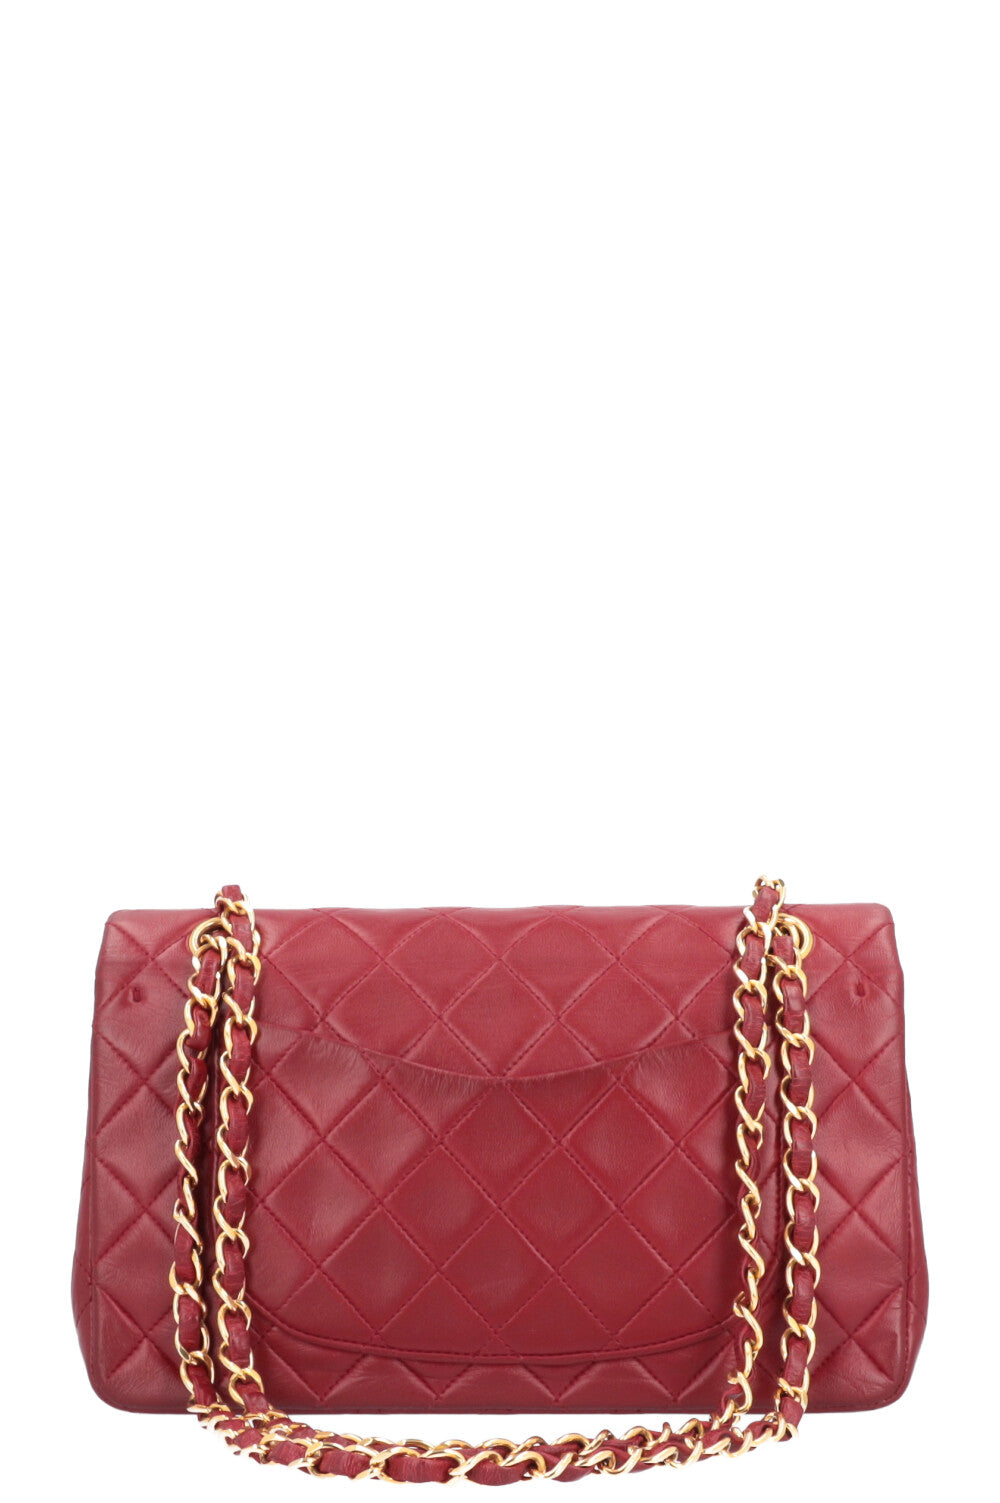 CHANEL Vintage Double Flap Bag Small